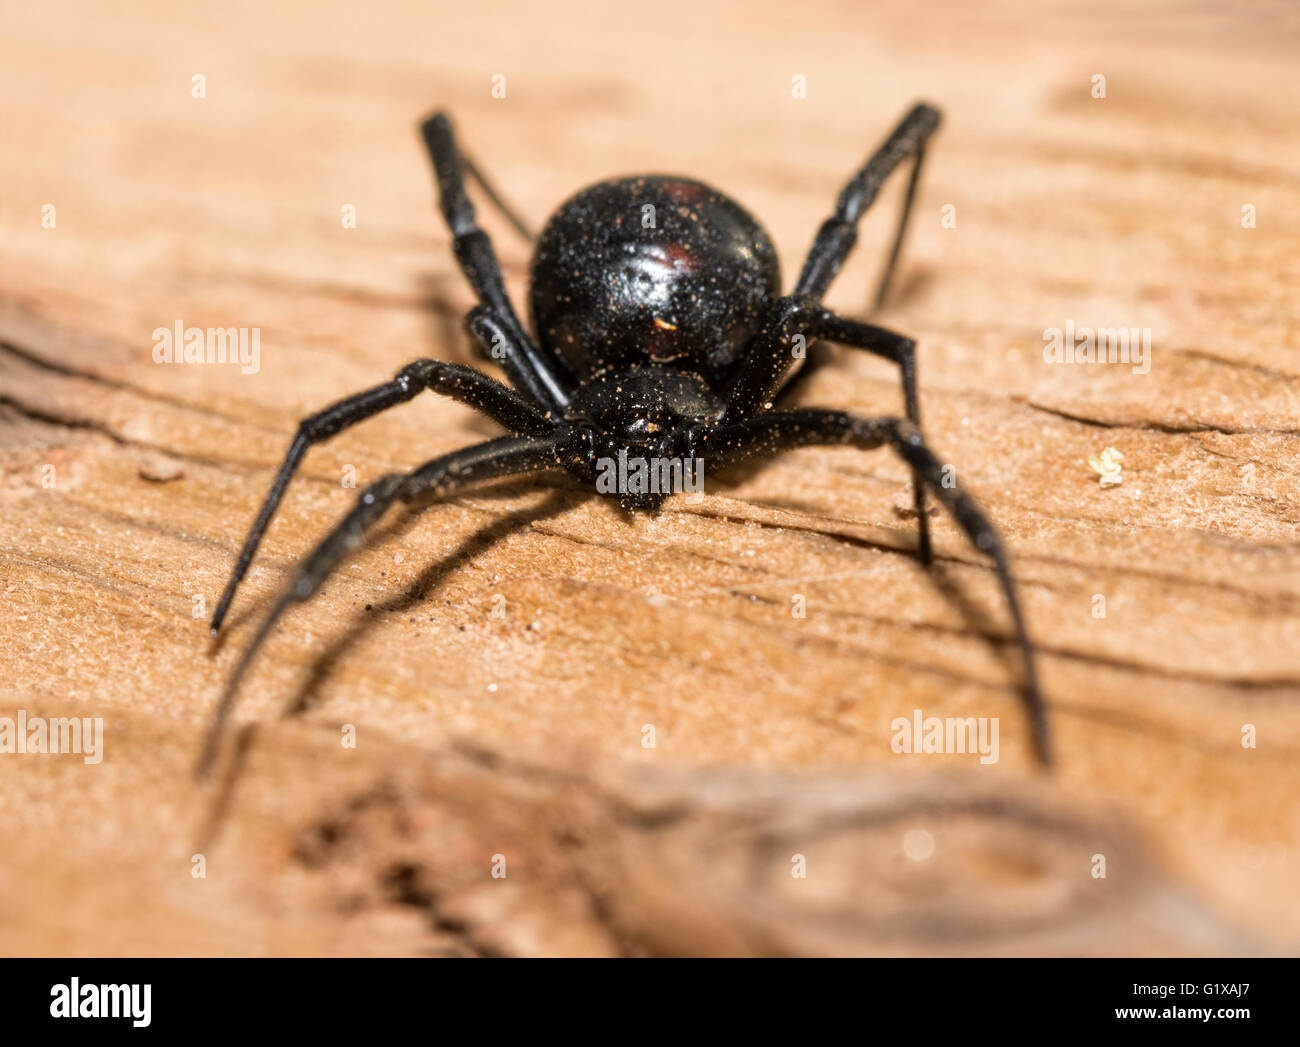 Black Widow spider outdoors on a piece of wood, front view Stock Photo